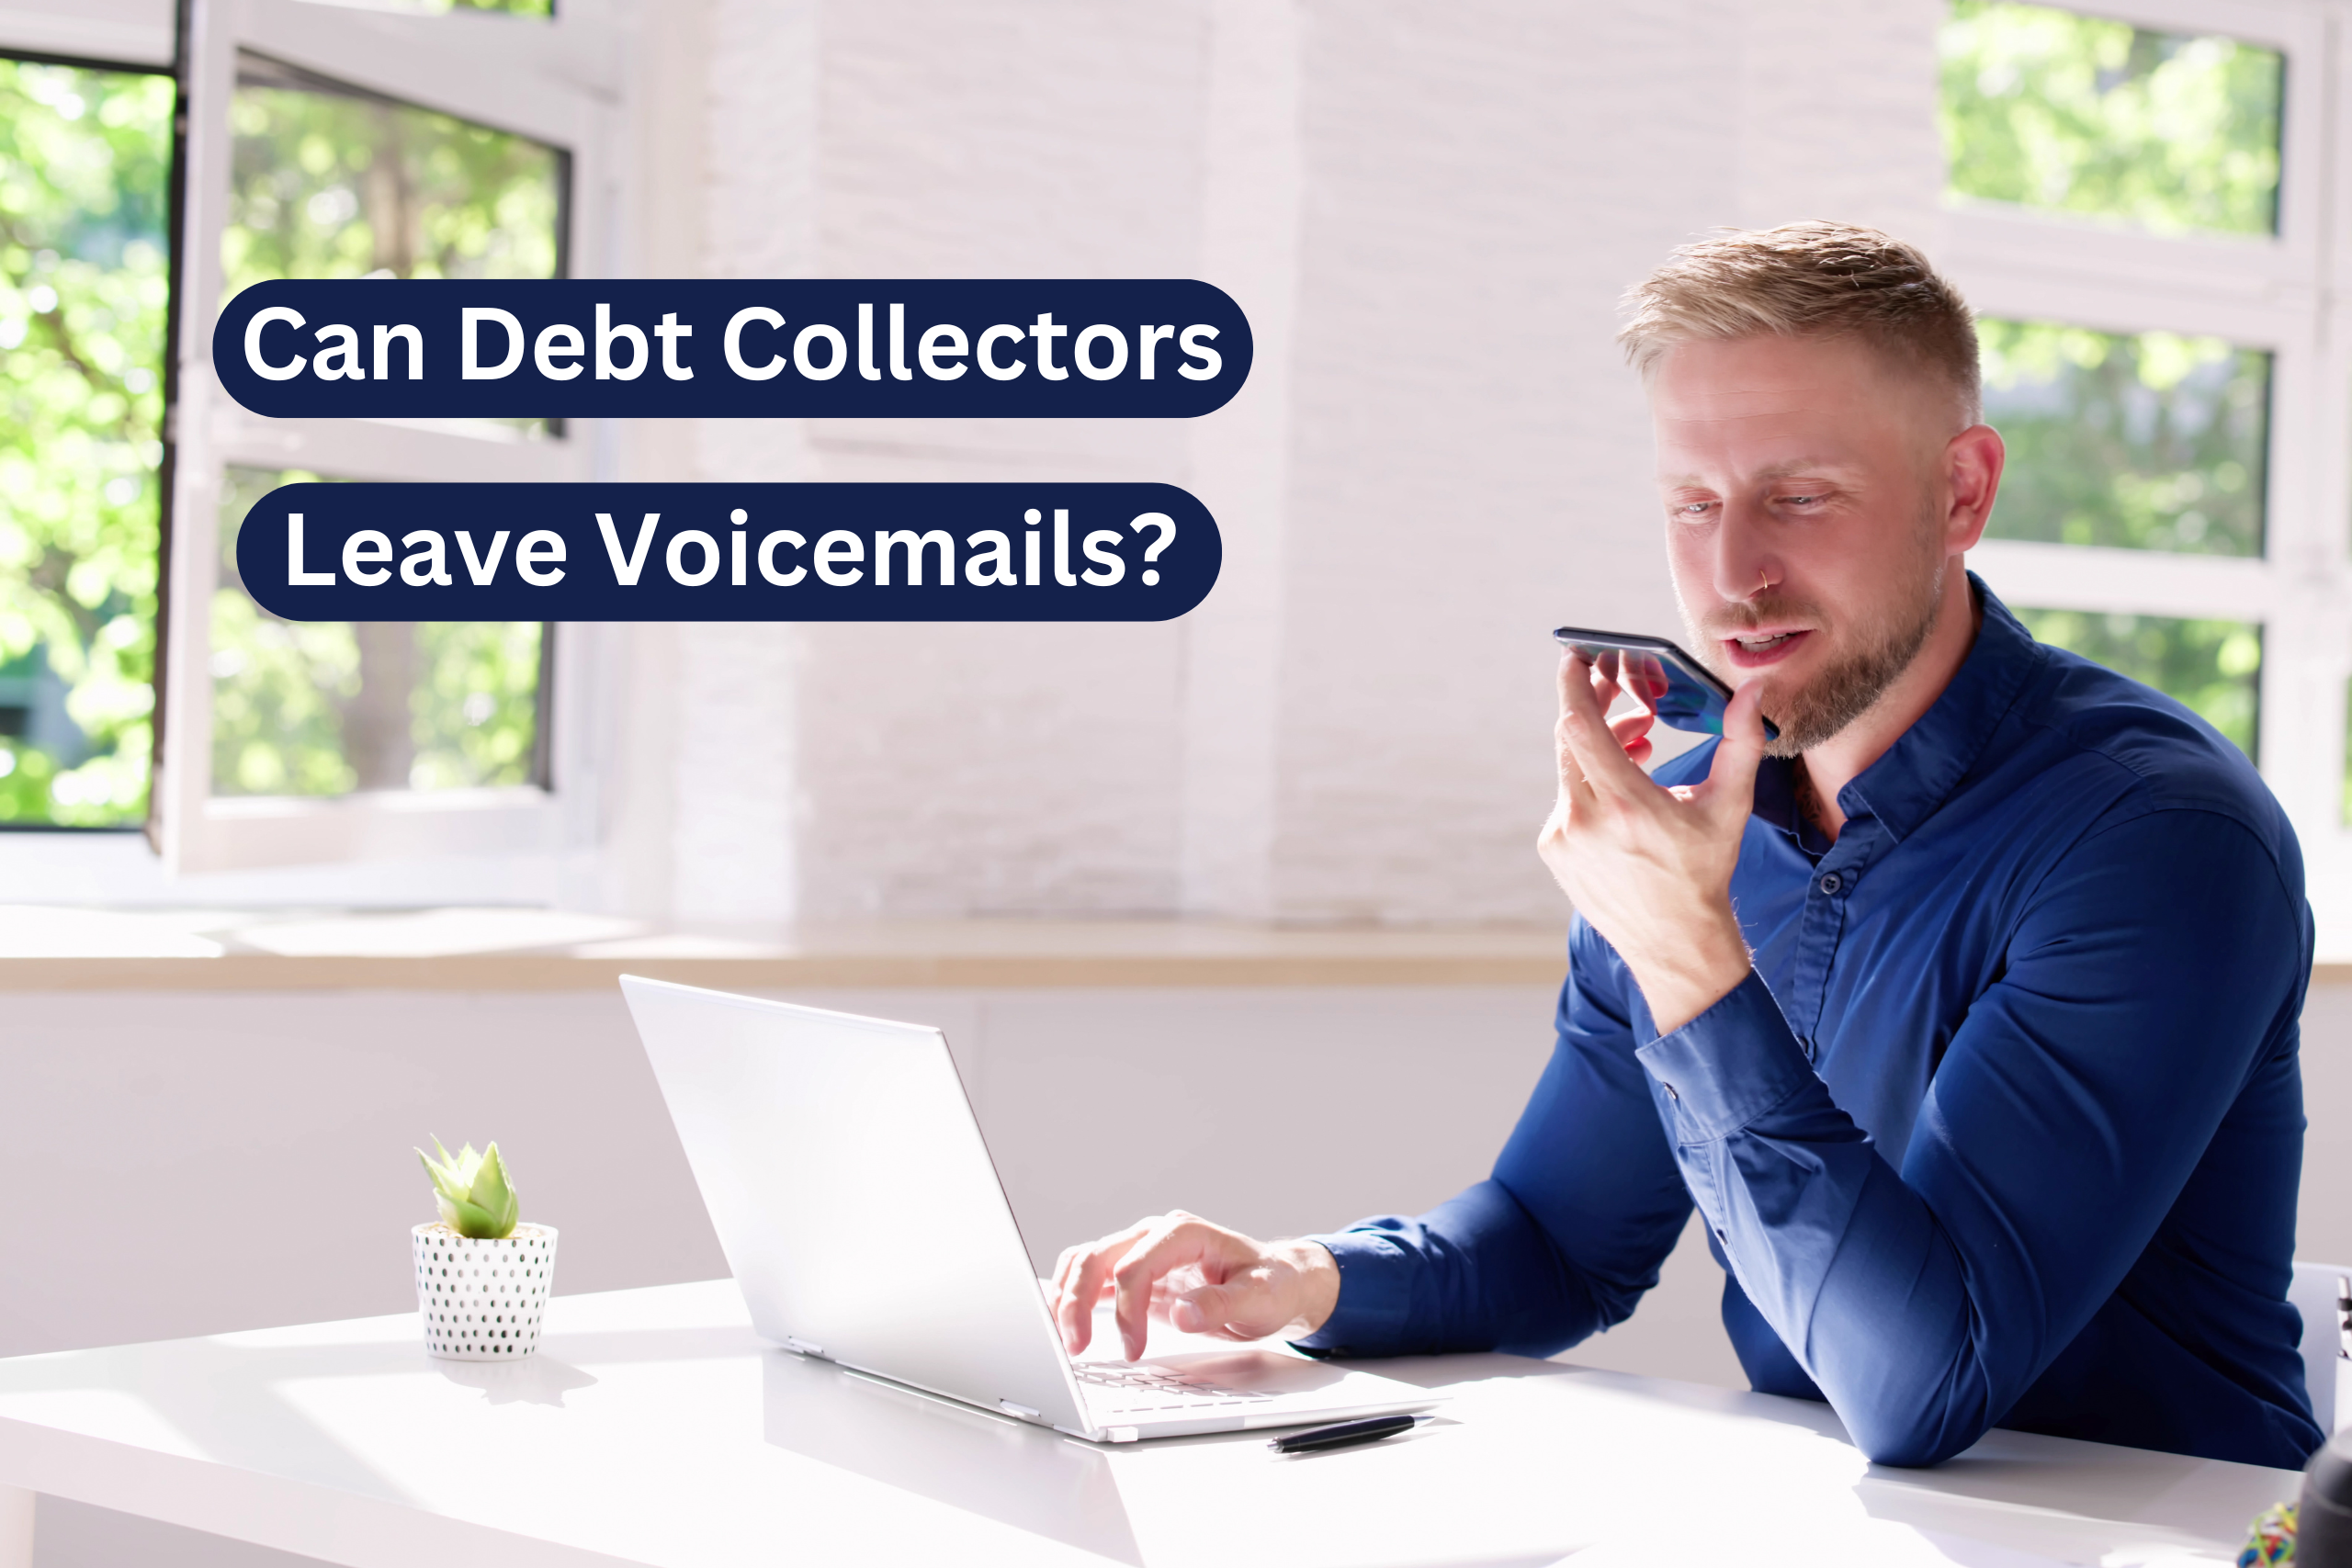 Can Debt Collectors Leave Voicemails?